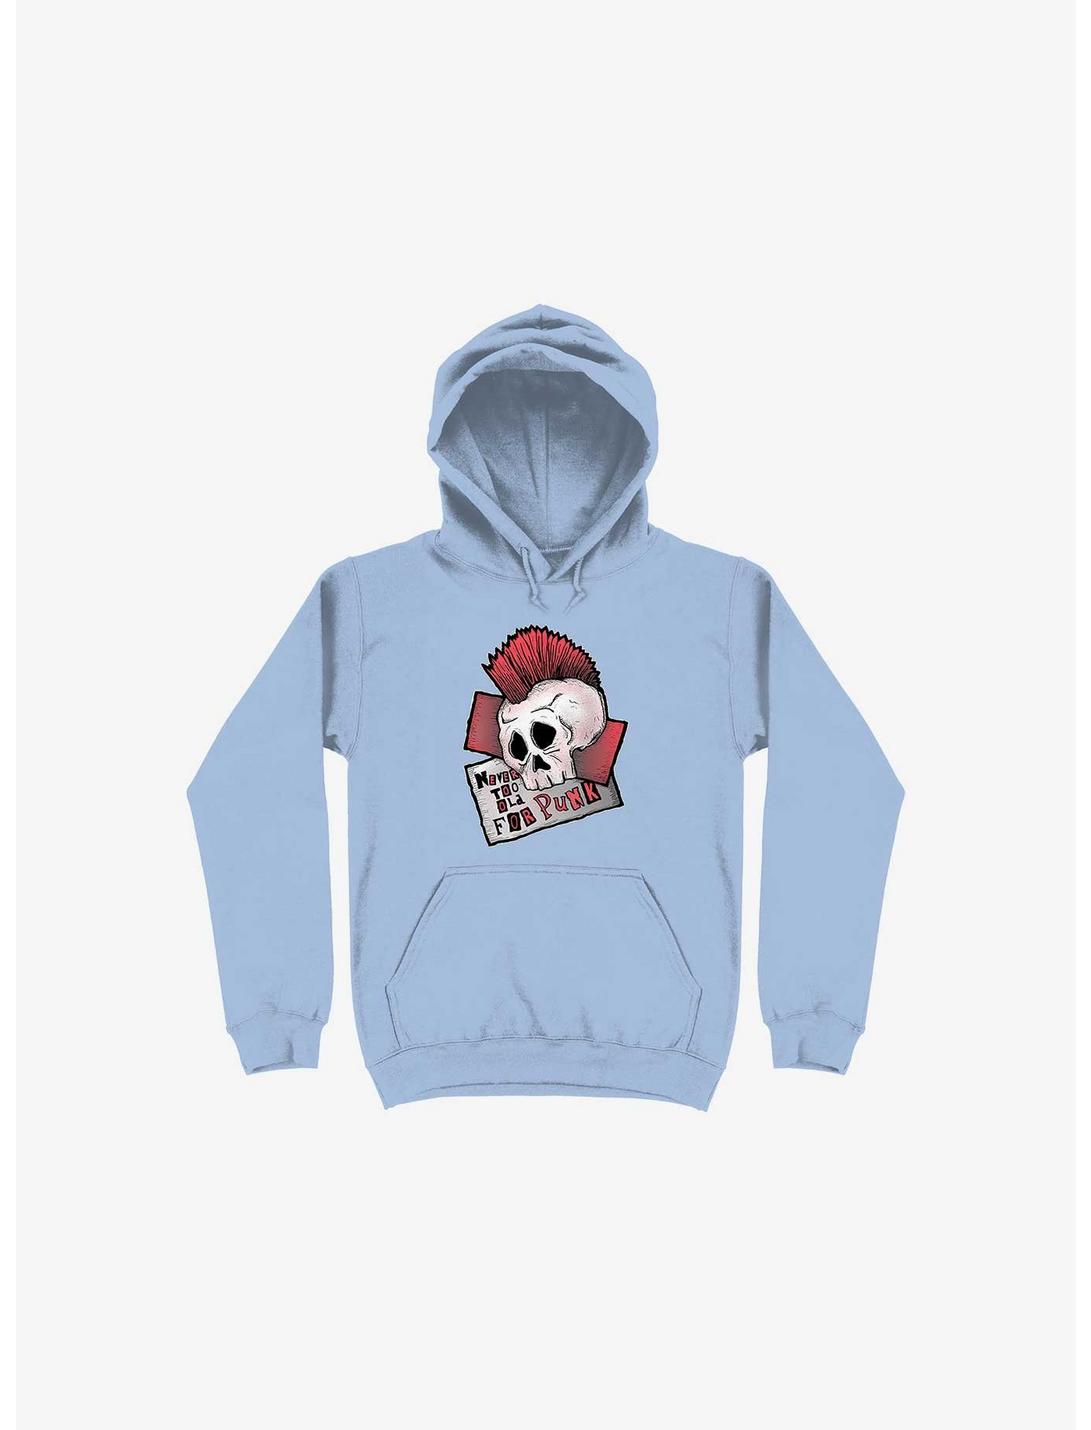 Never Too Old For Punk! Hoodie, LIGHT BLUE, hi-res